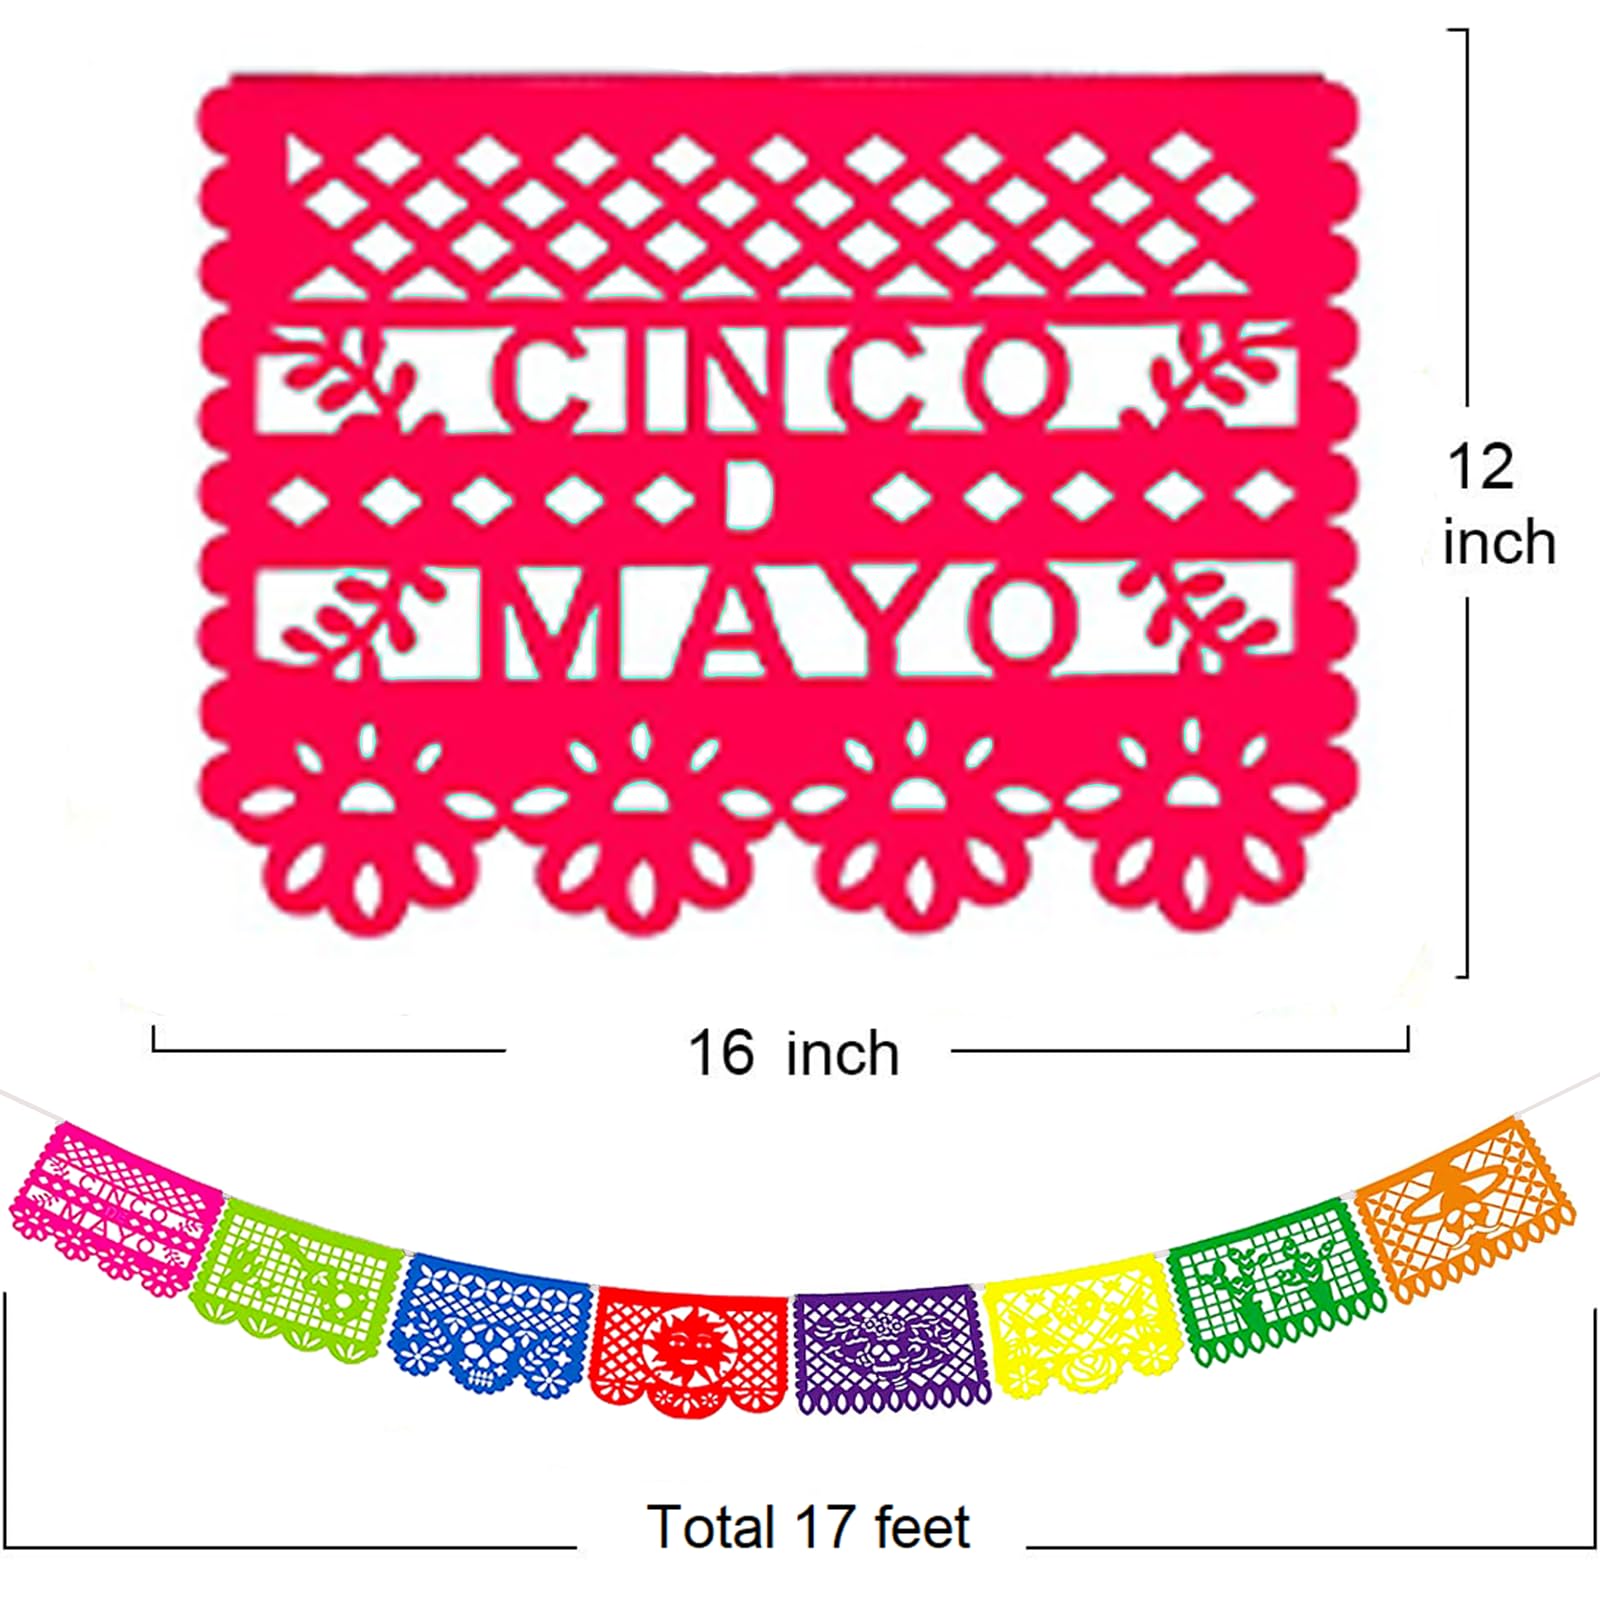 KUCHERI 5 Packs 85Ft Mexican Party Banners, Mexican Themed Party Decorations, Plastic Papel Picado Banner, For Fiesta Party Decorations, Cino de Mayo, Day of The Dead, 85 Feet Long Total